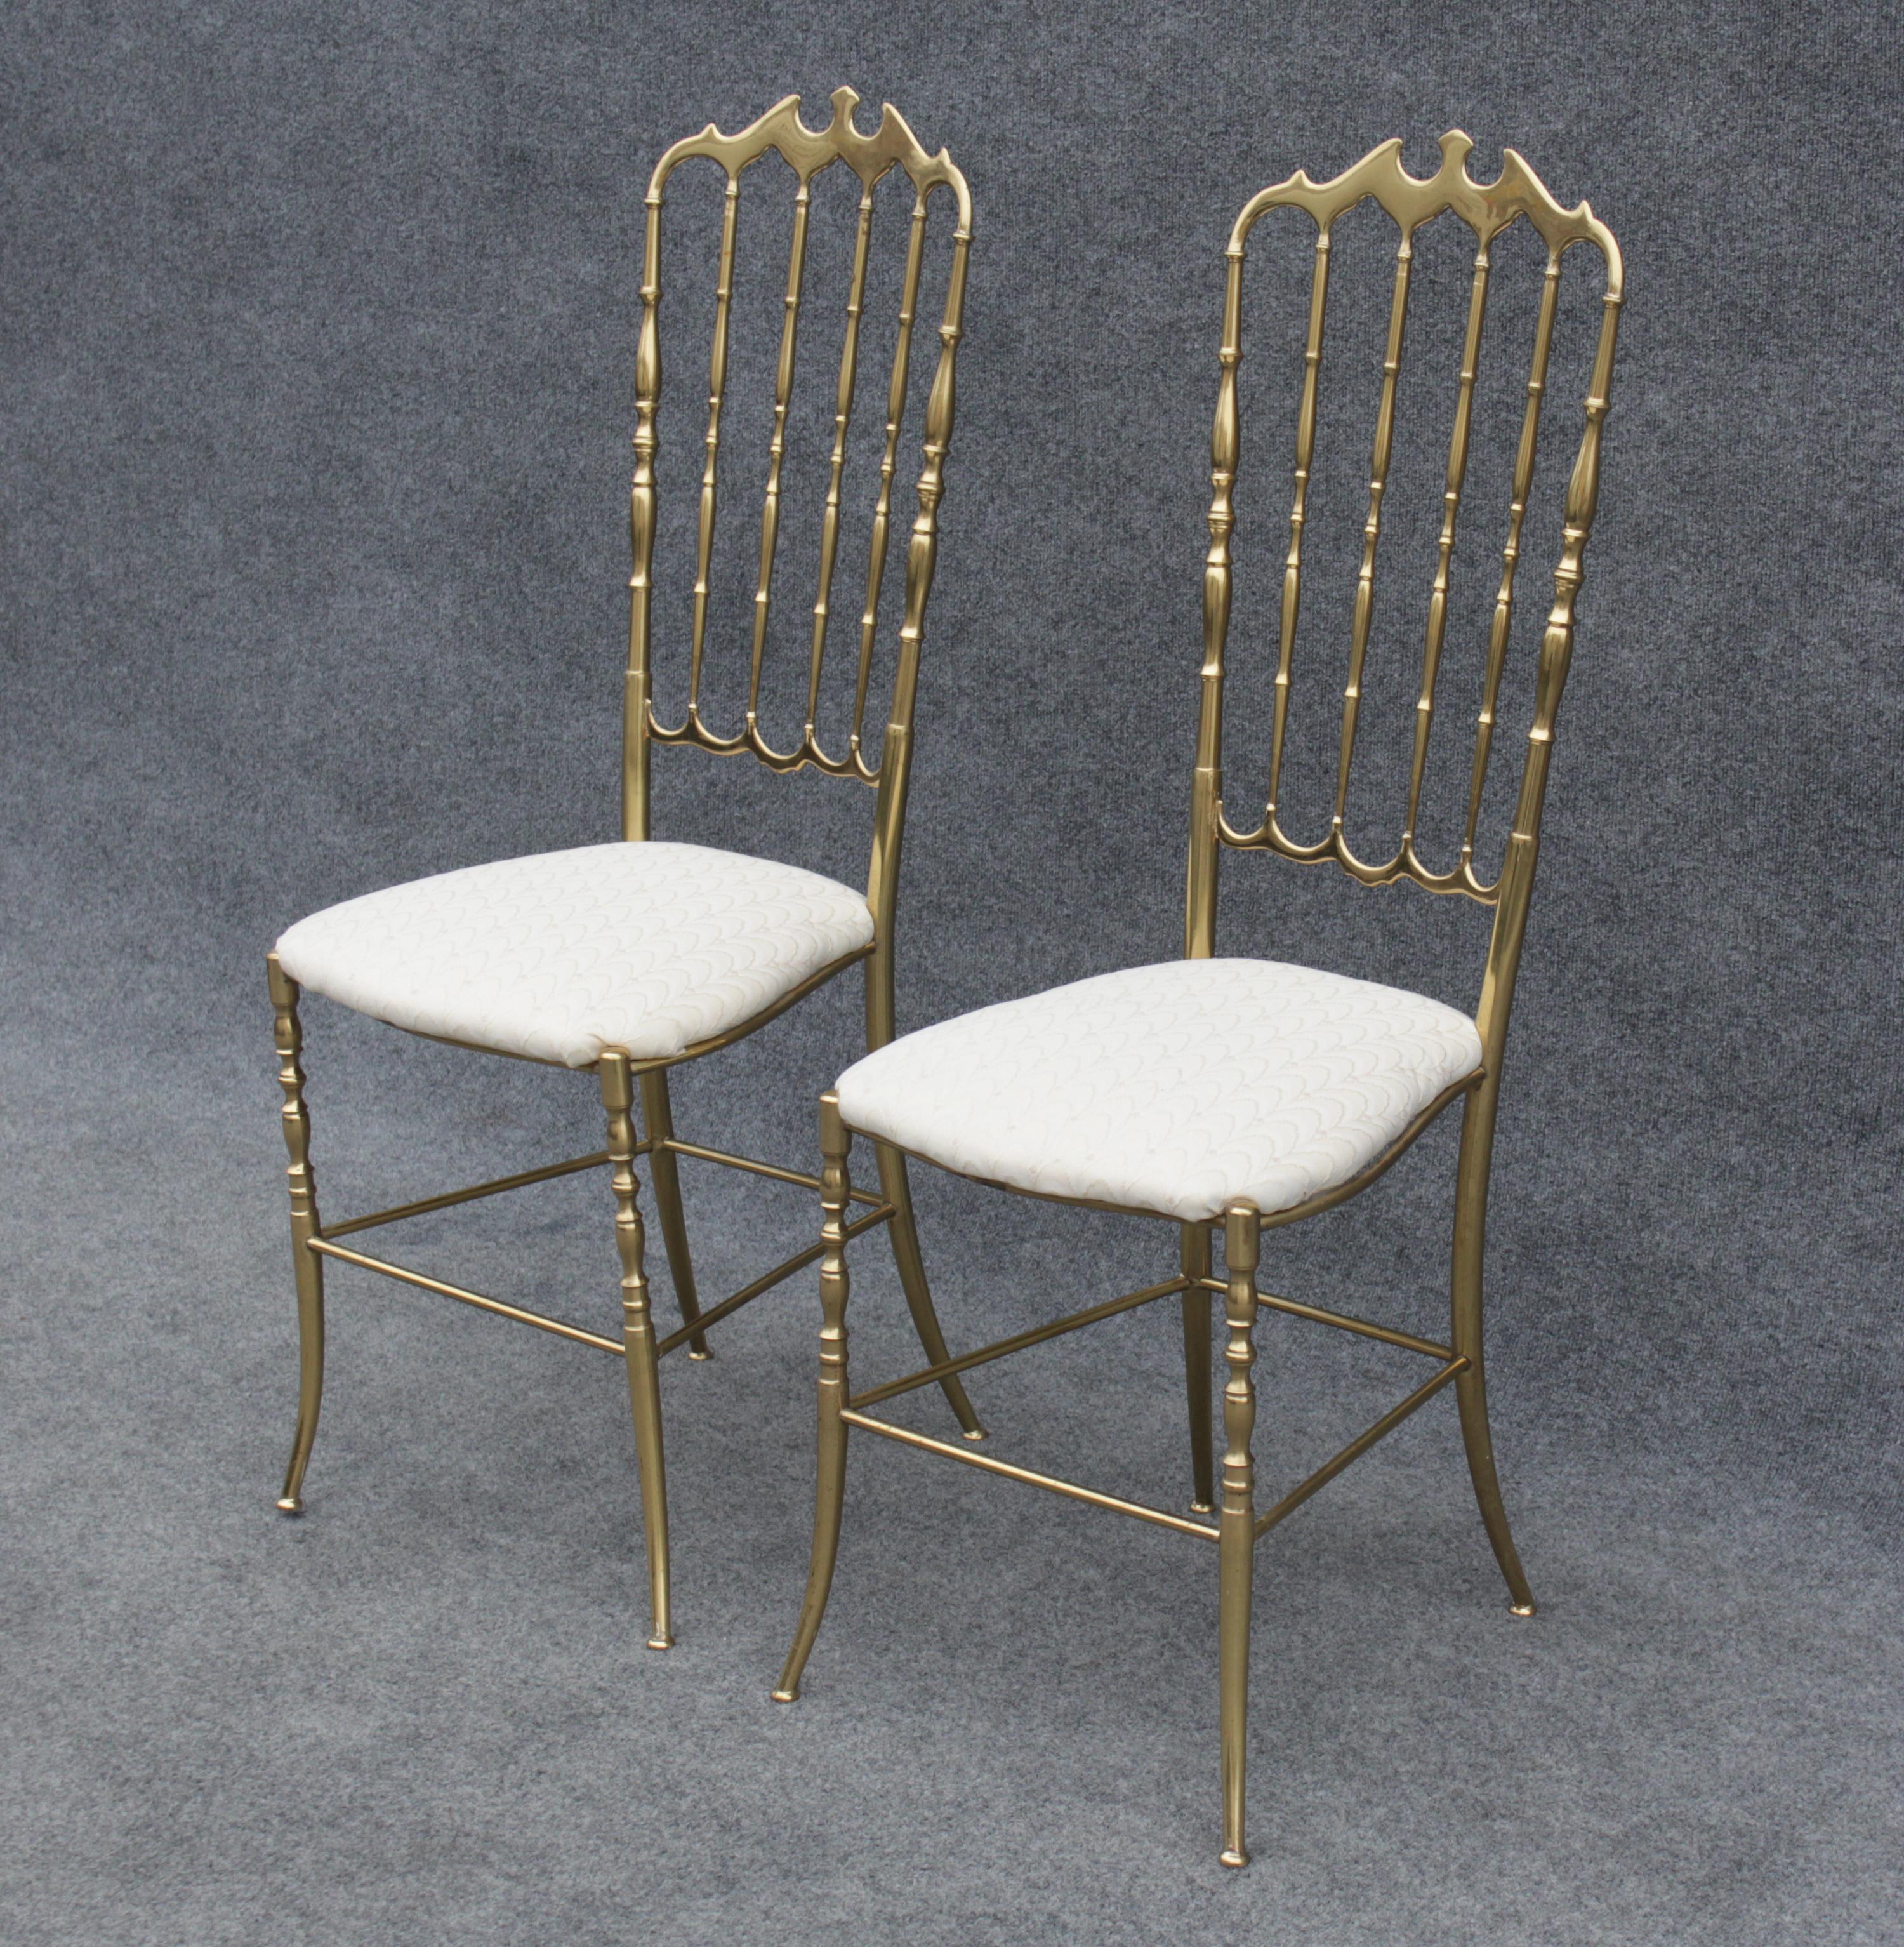 Pair of Solid Brass & White Upholstered Dining or Side Chairs by Chiavari Italy In Good Condition For Sale In Philadelphia, PA